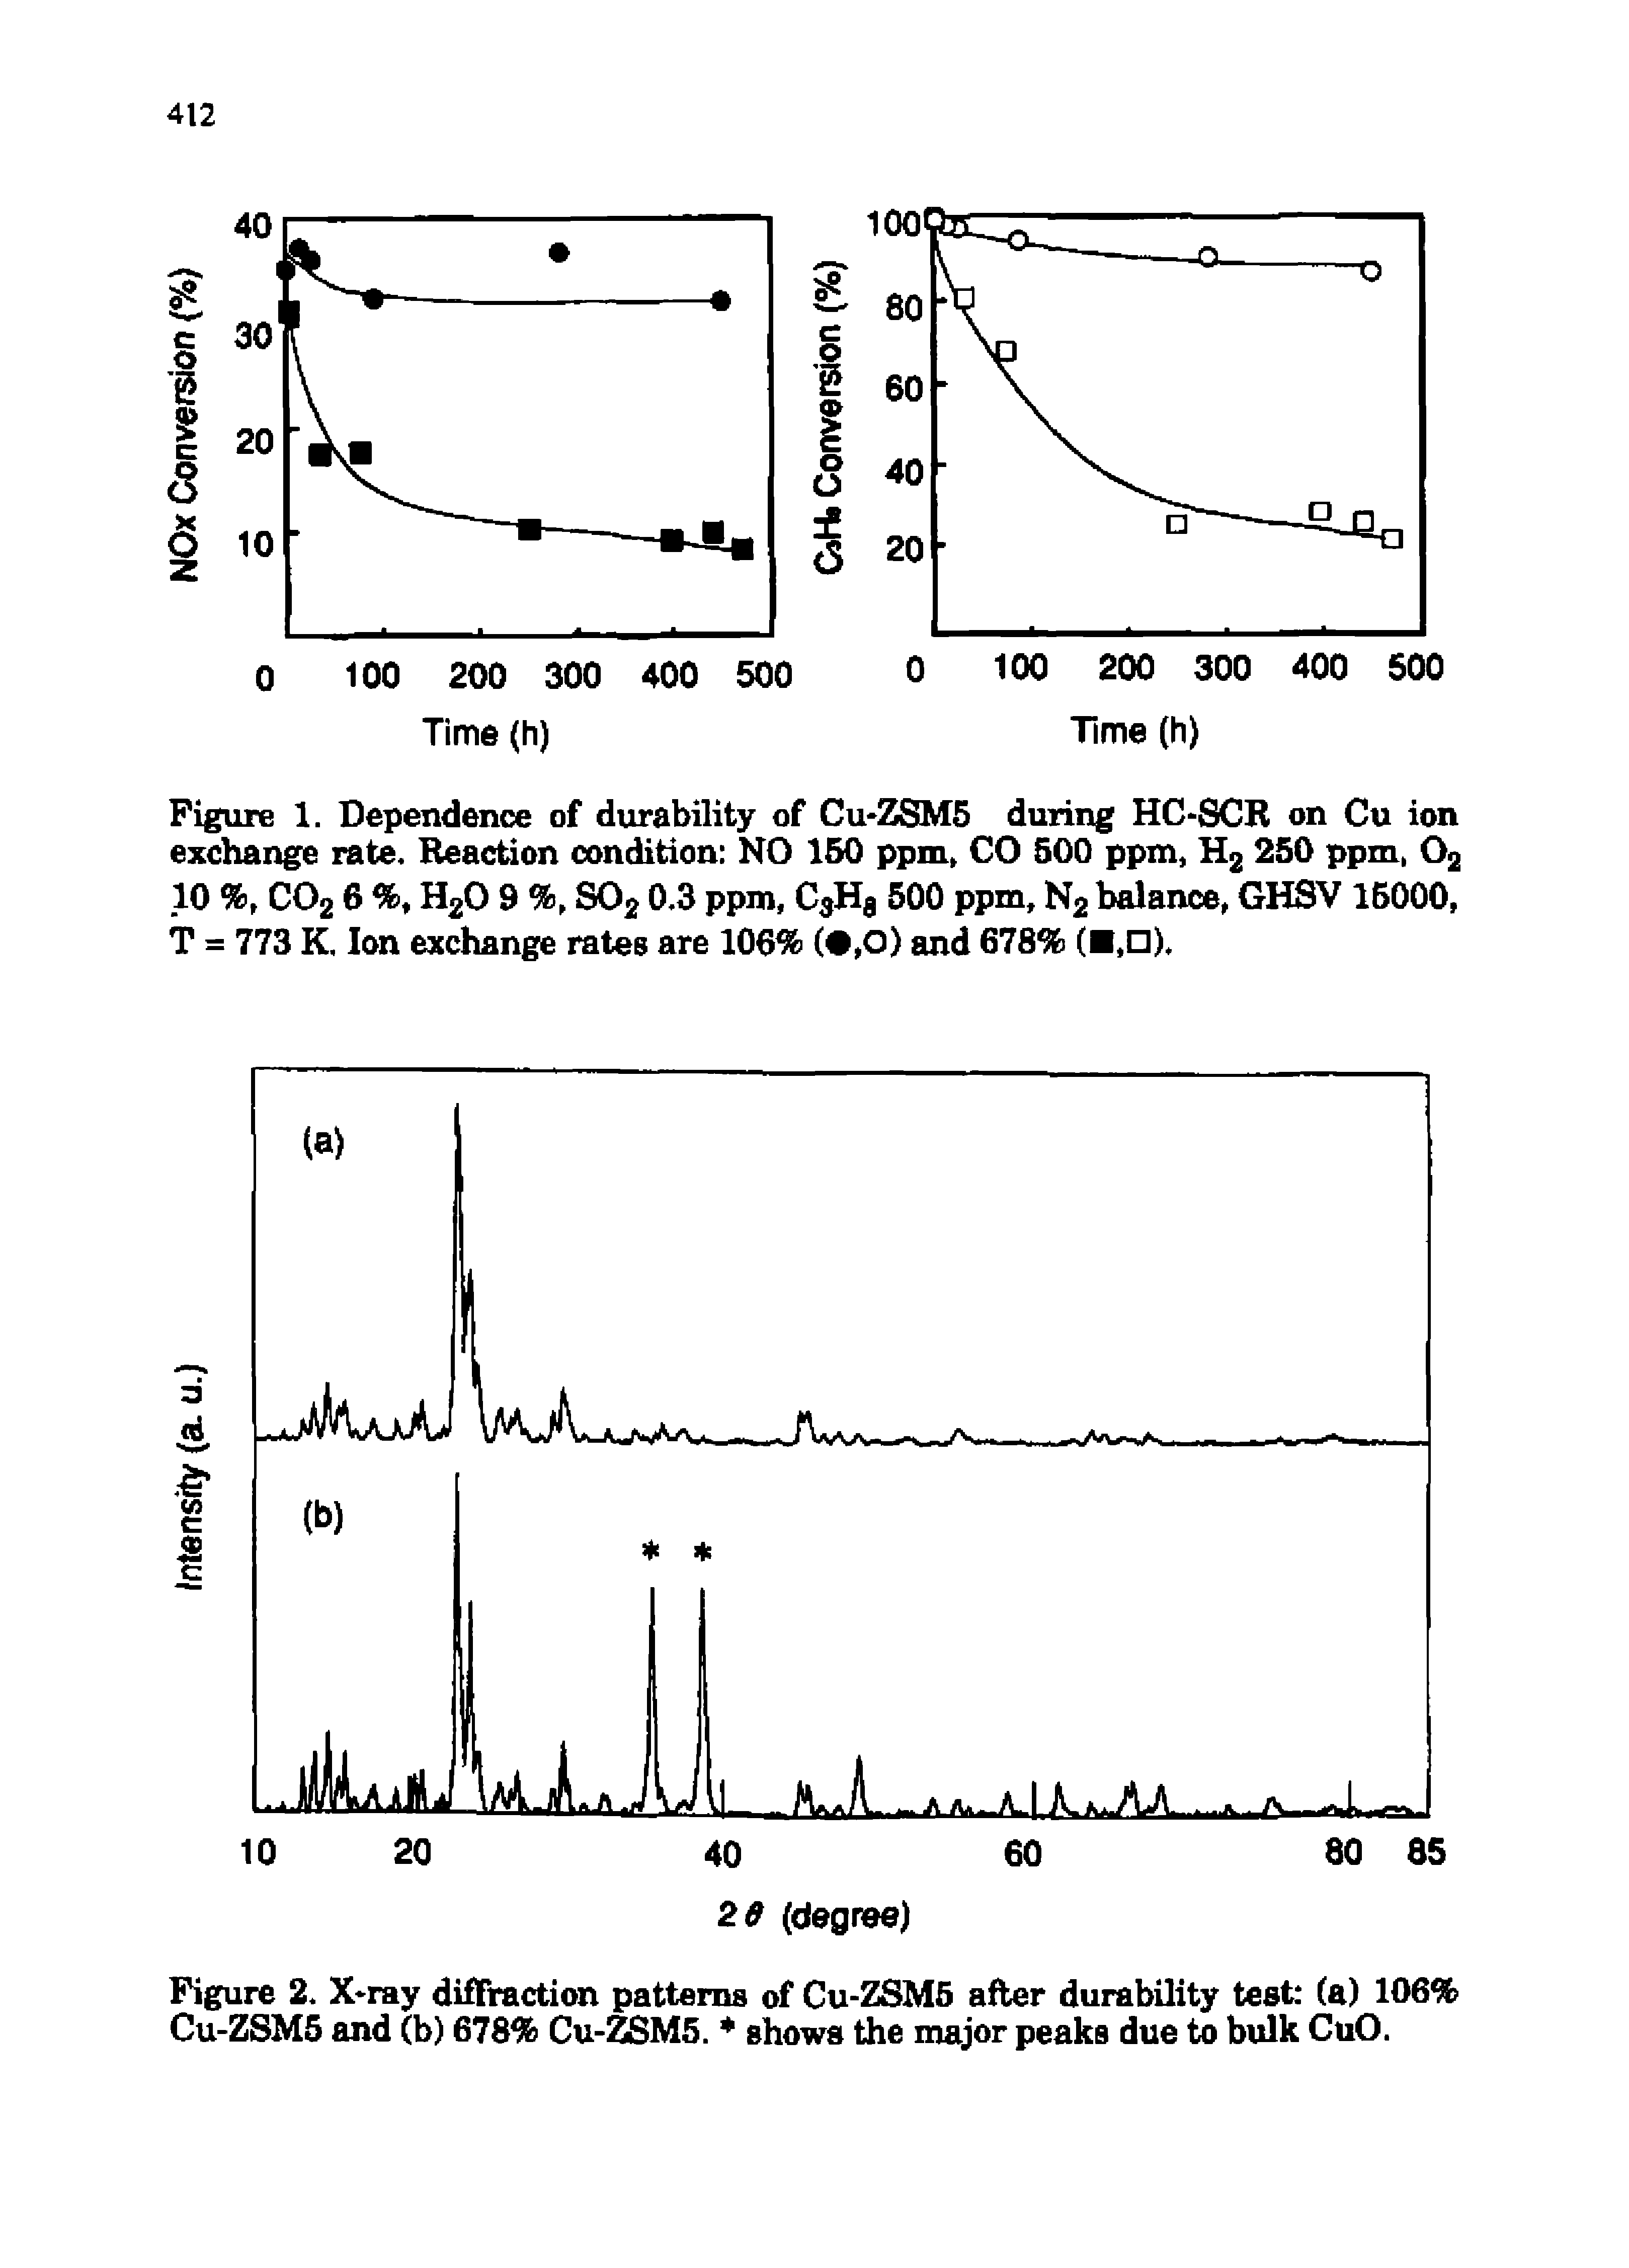 Figure 1. Dependence of durability of Cu ZSM5 during HC-SCR on Cu ion exchange rate. Reaction condition NO 150 ppm, CO 500 ppm, H2 250 ppm, 02...